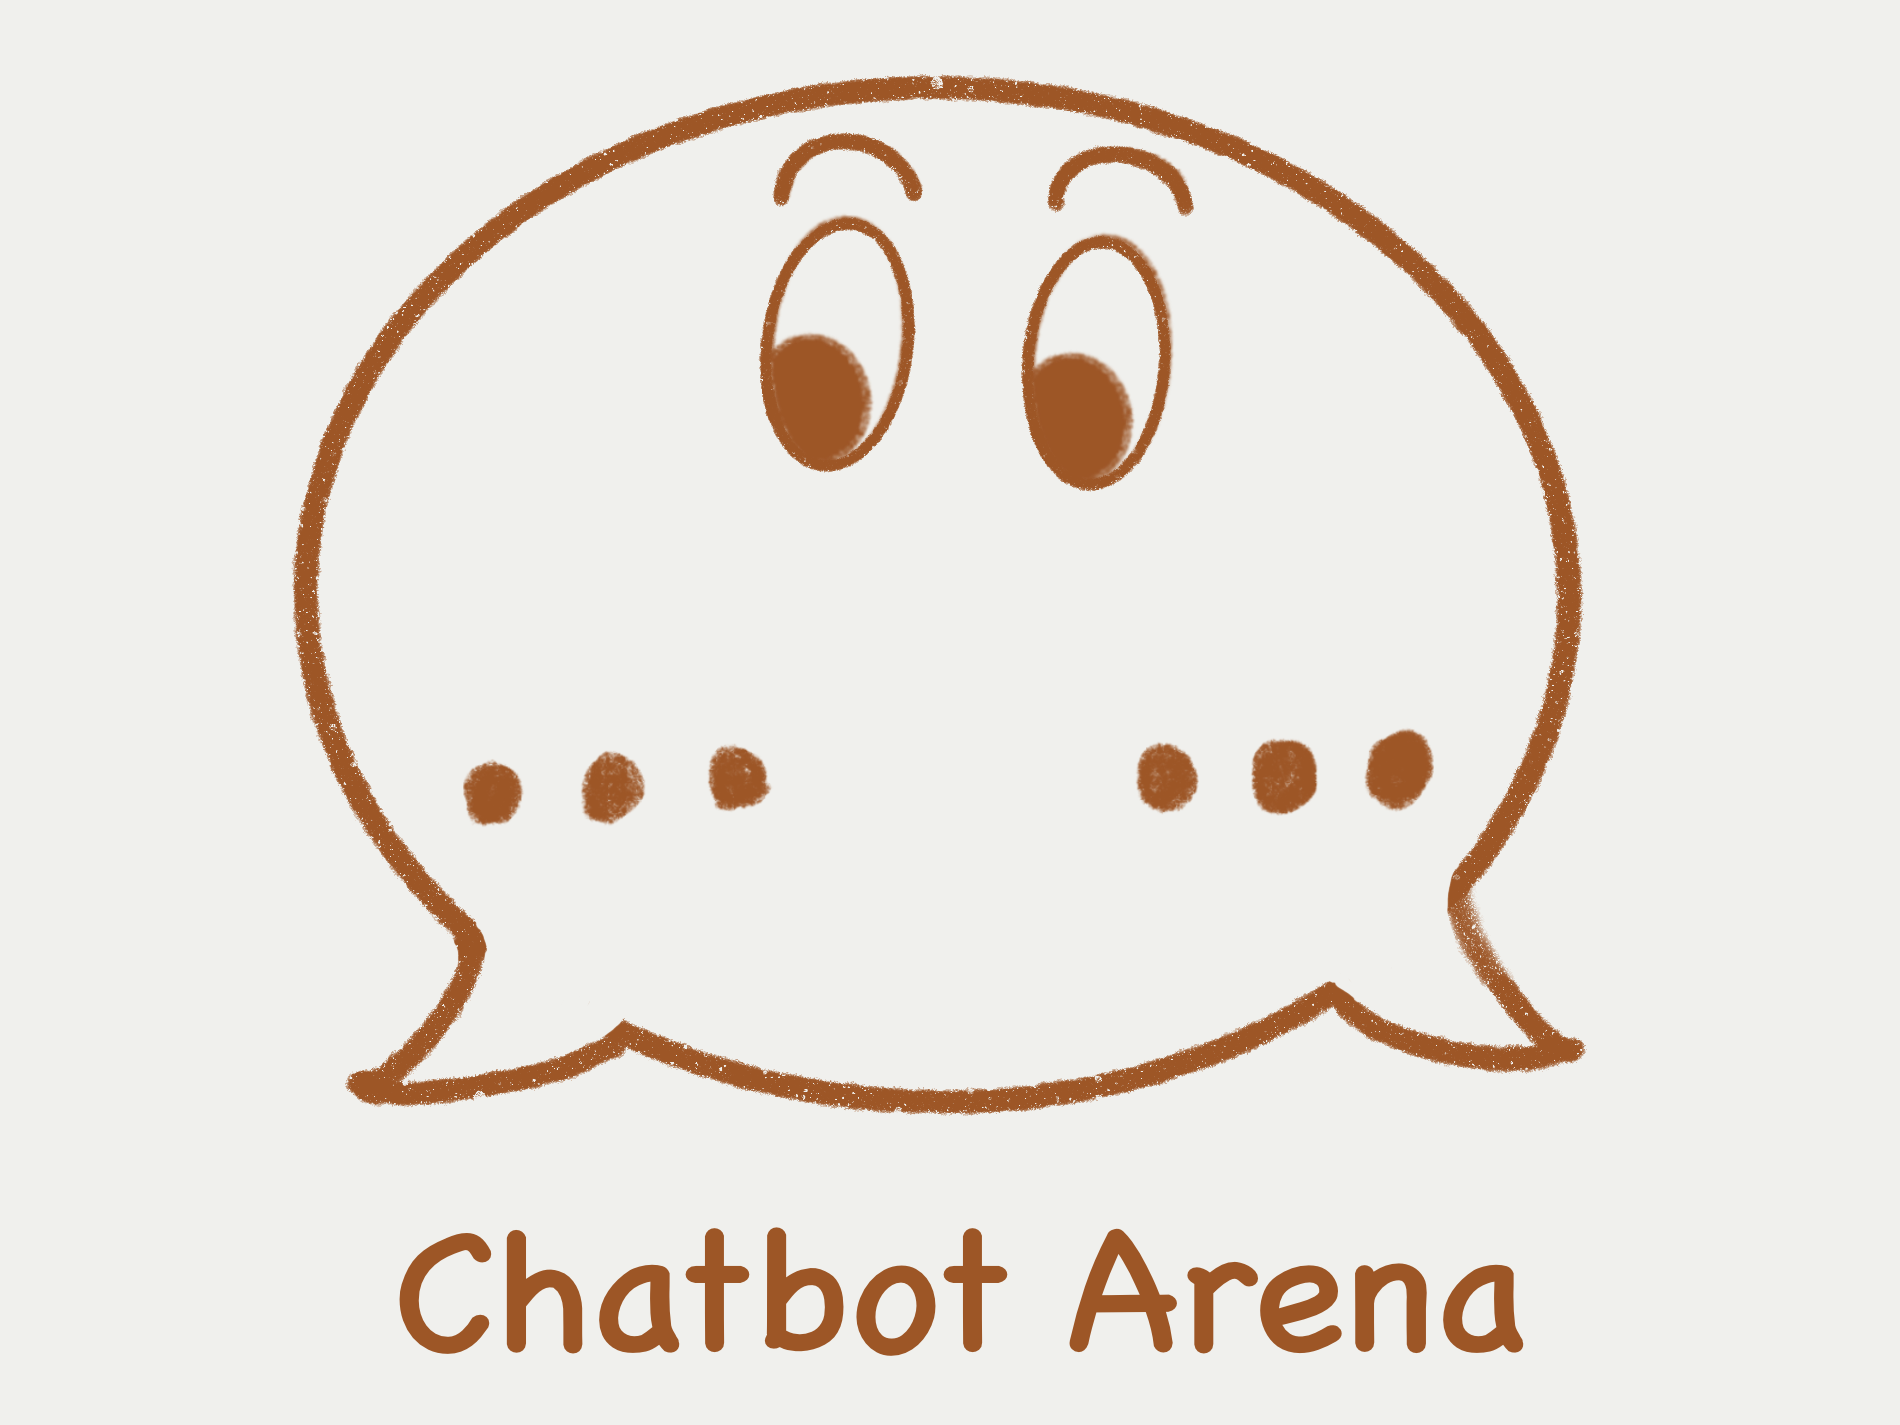 Chatbot Arena (chat.lmsys.org) is an open-source project developed by members from LMSYS and UC Berkeley SkyLab. Our mission is to advance LLM develop